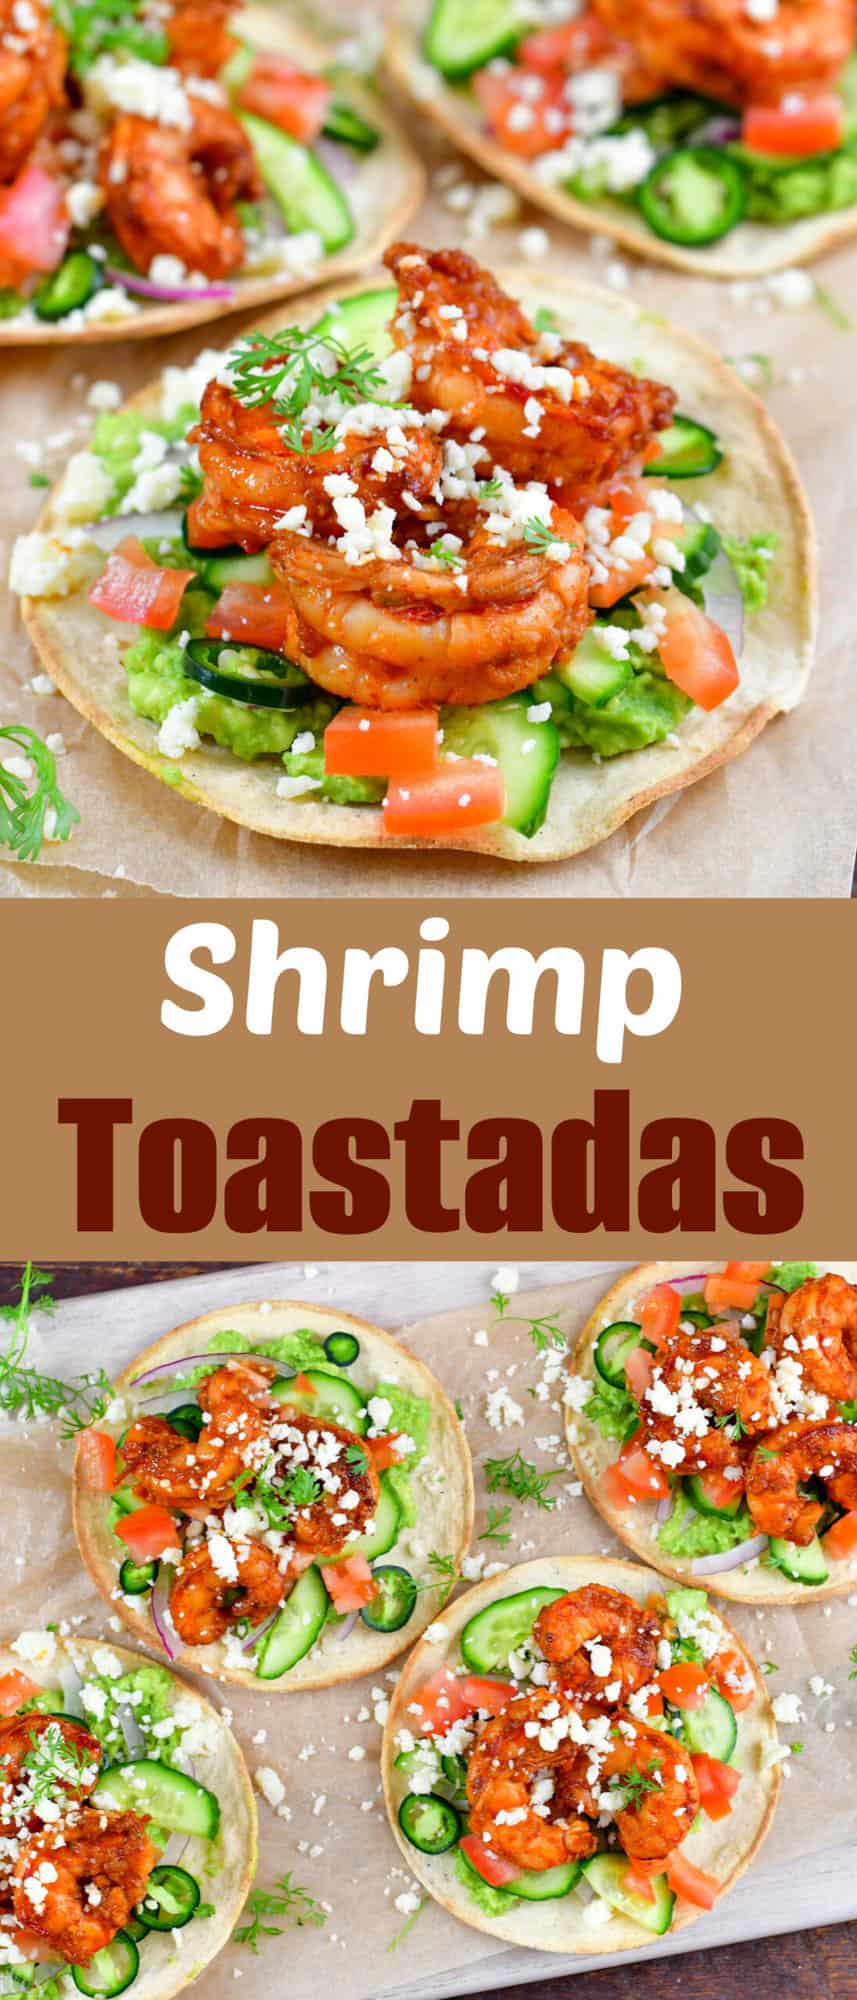 collage of two shrimp tostadas images close up and title